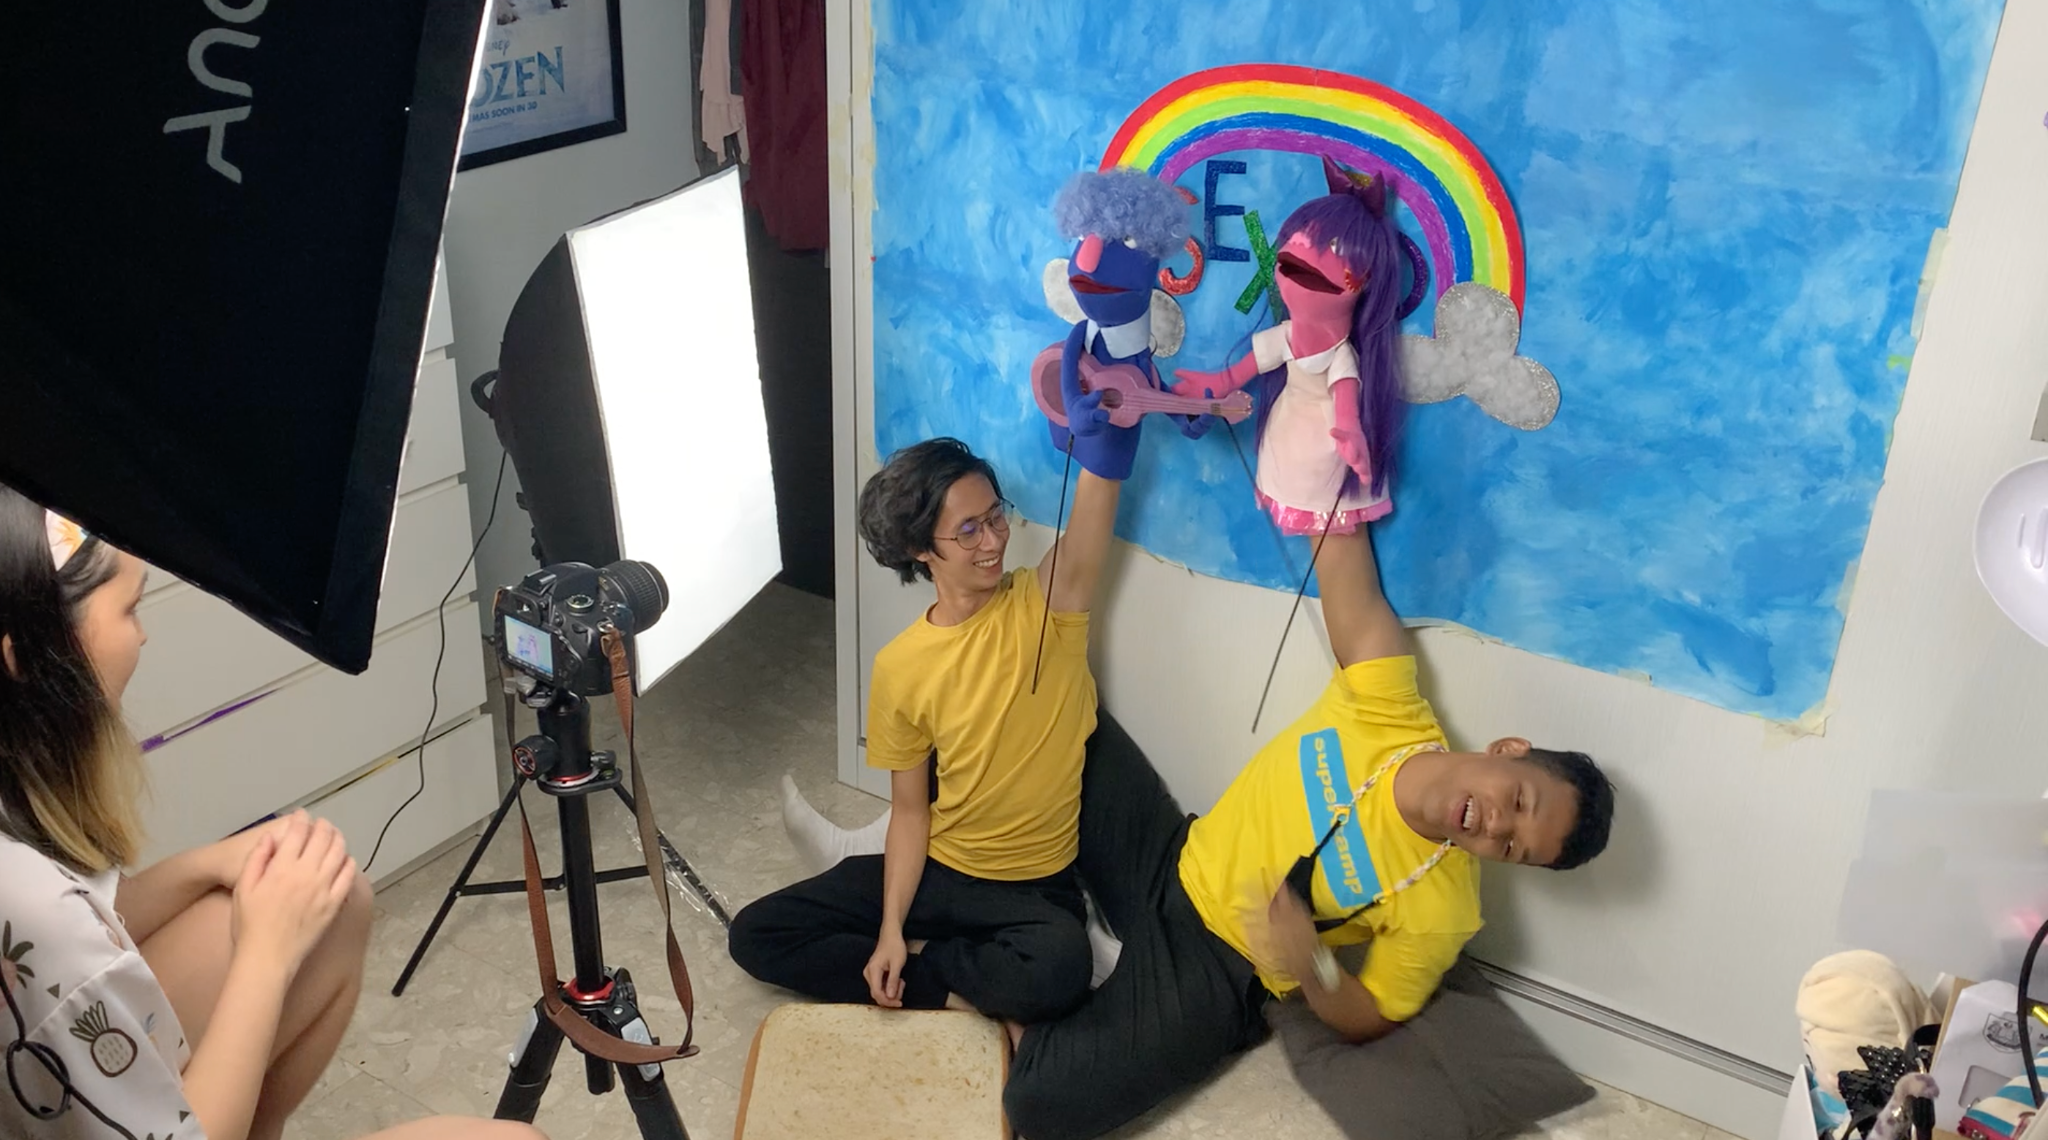 Puppeteers Matthias Teh En and Irsyad Dawood act out an educational video by Ministry of Educating in a sequence highly reminiscent of webseries Don’t Hug Me I’m Scared.